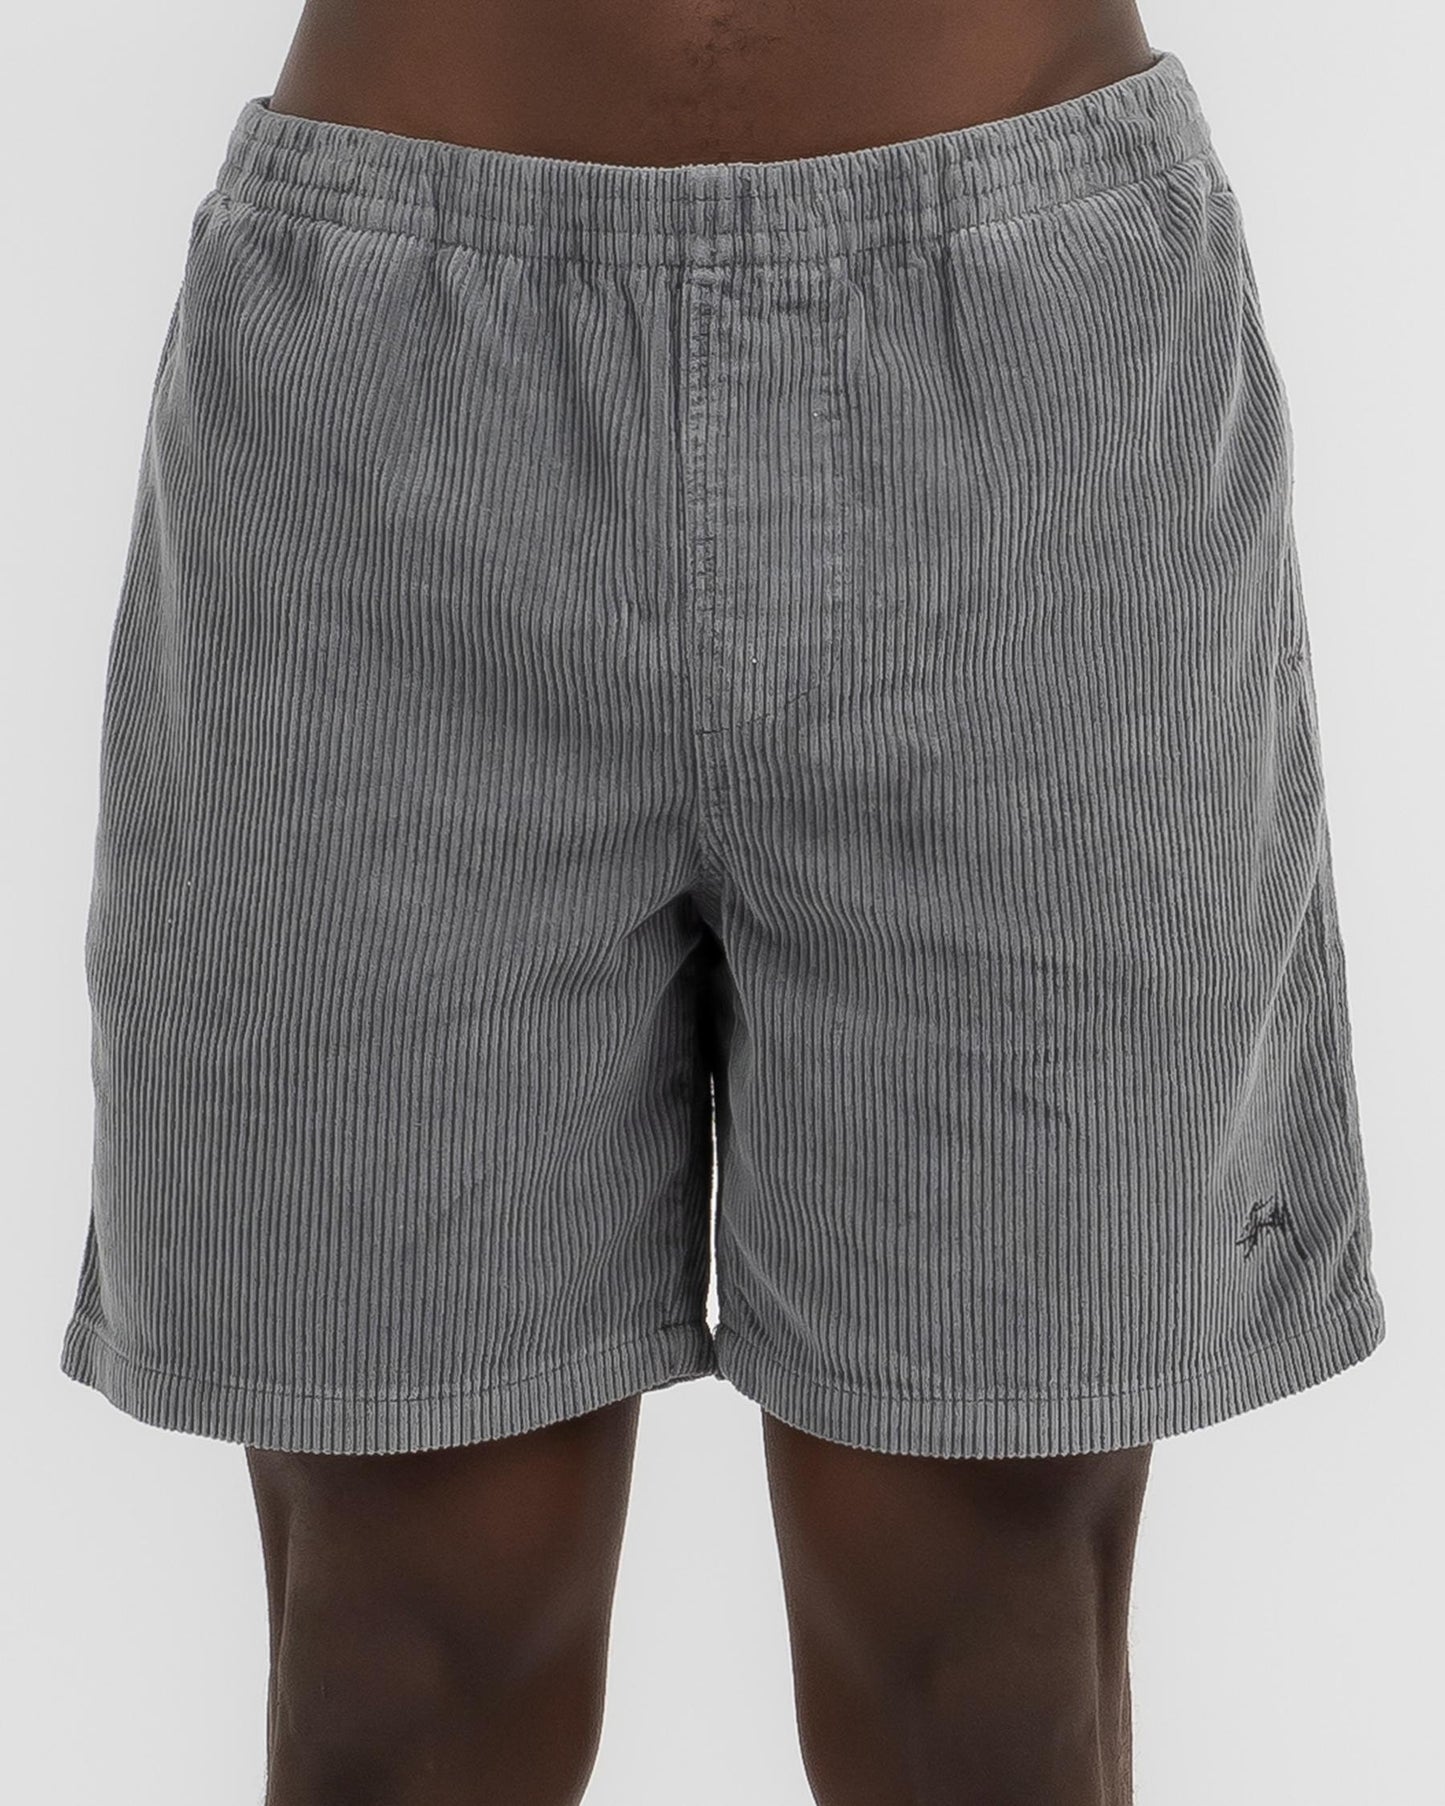 STUSSY Wide Wale Cord Mens Beach Short - Pigment Grey